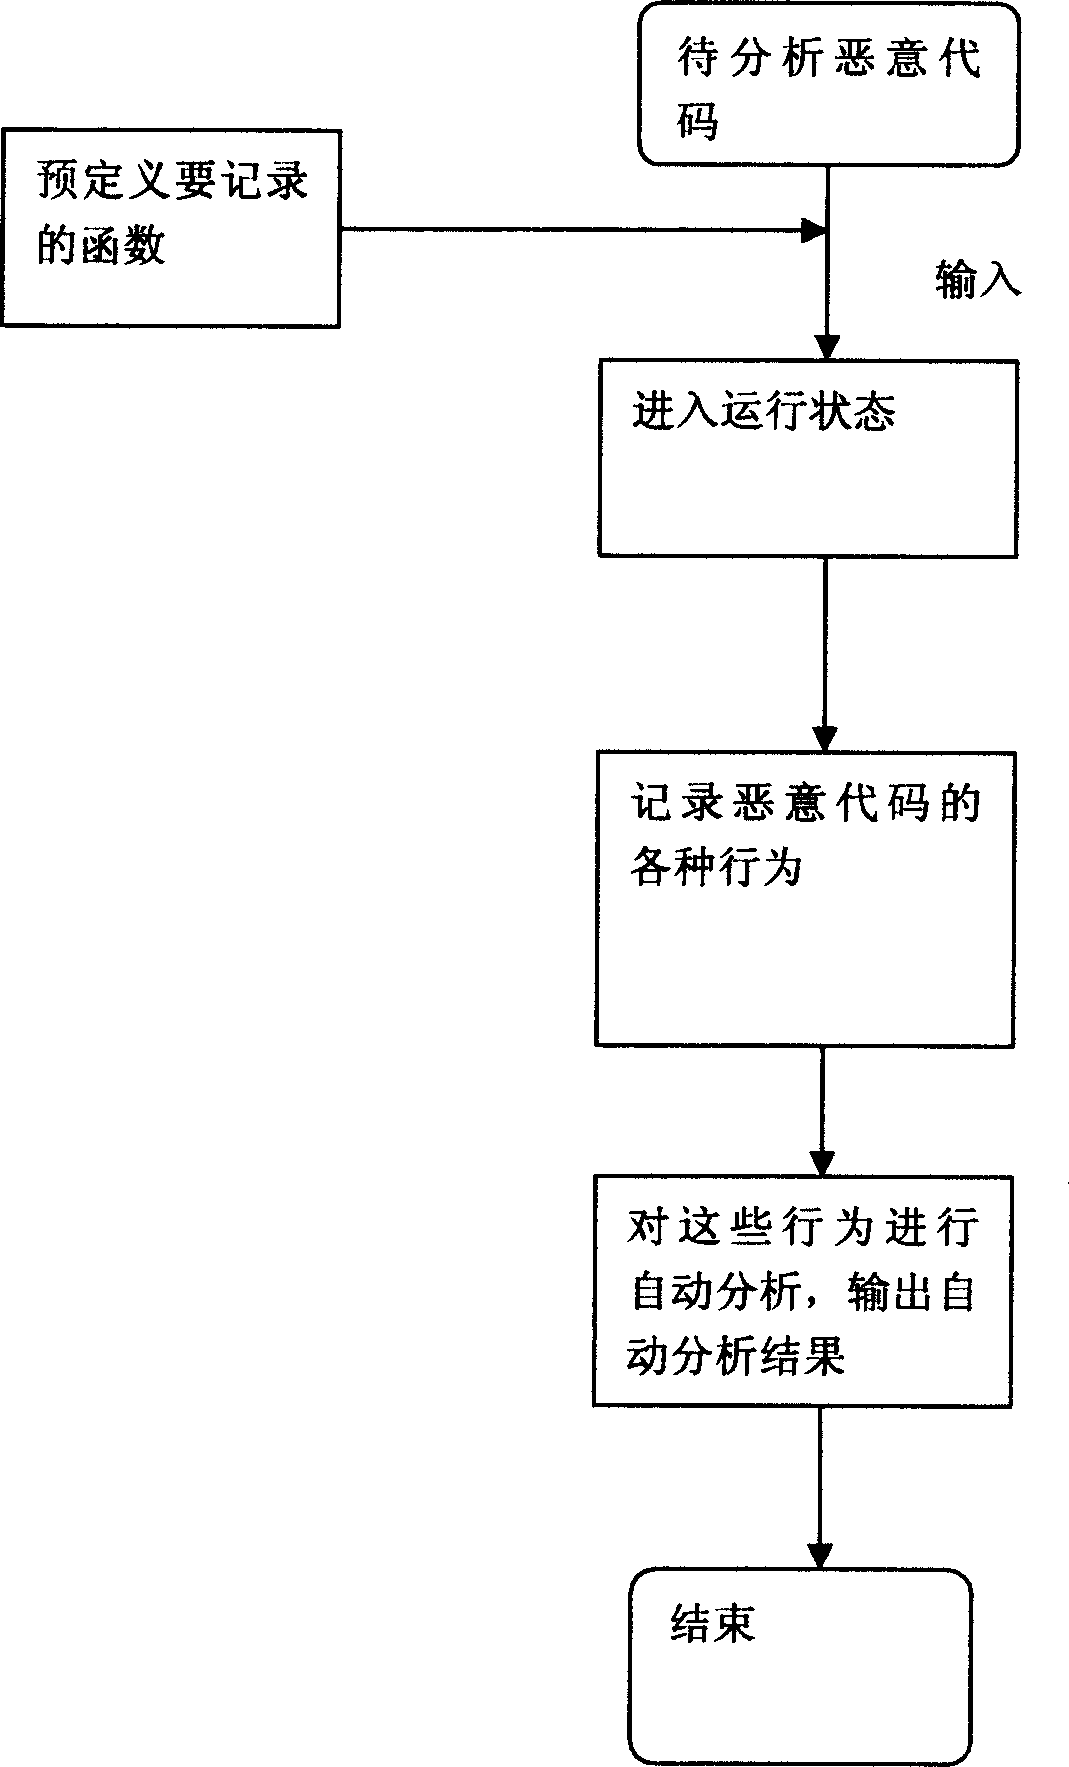 Automatic analysis system and method for malicious code